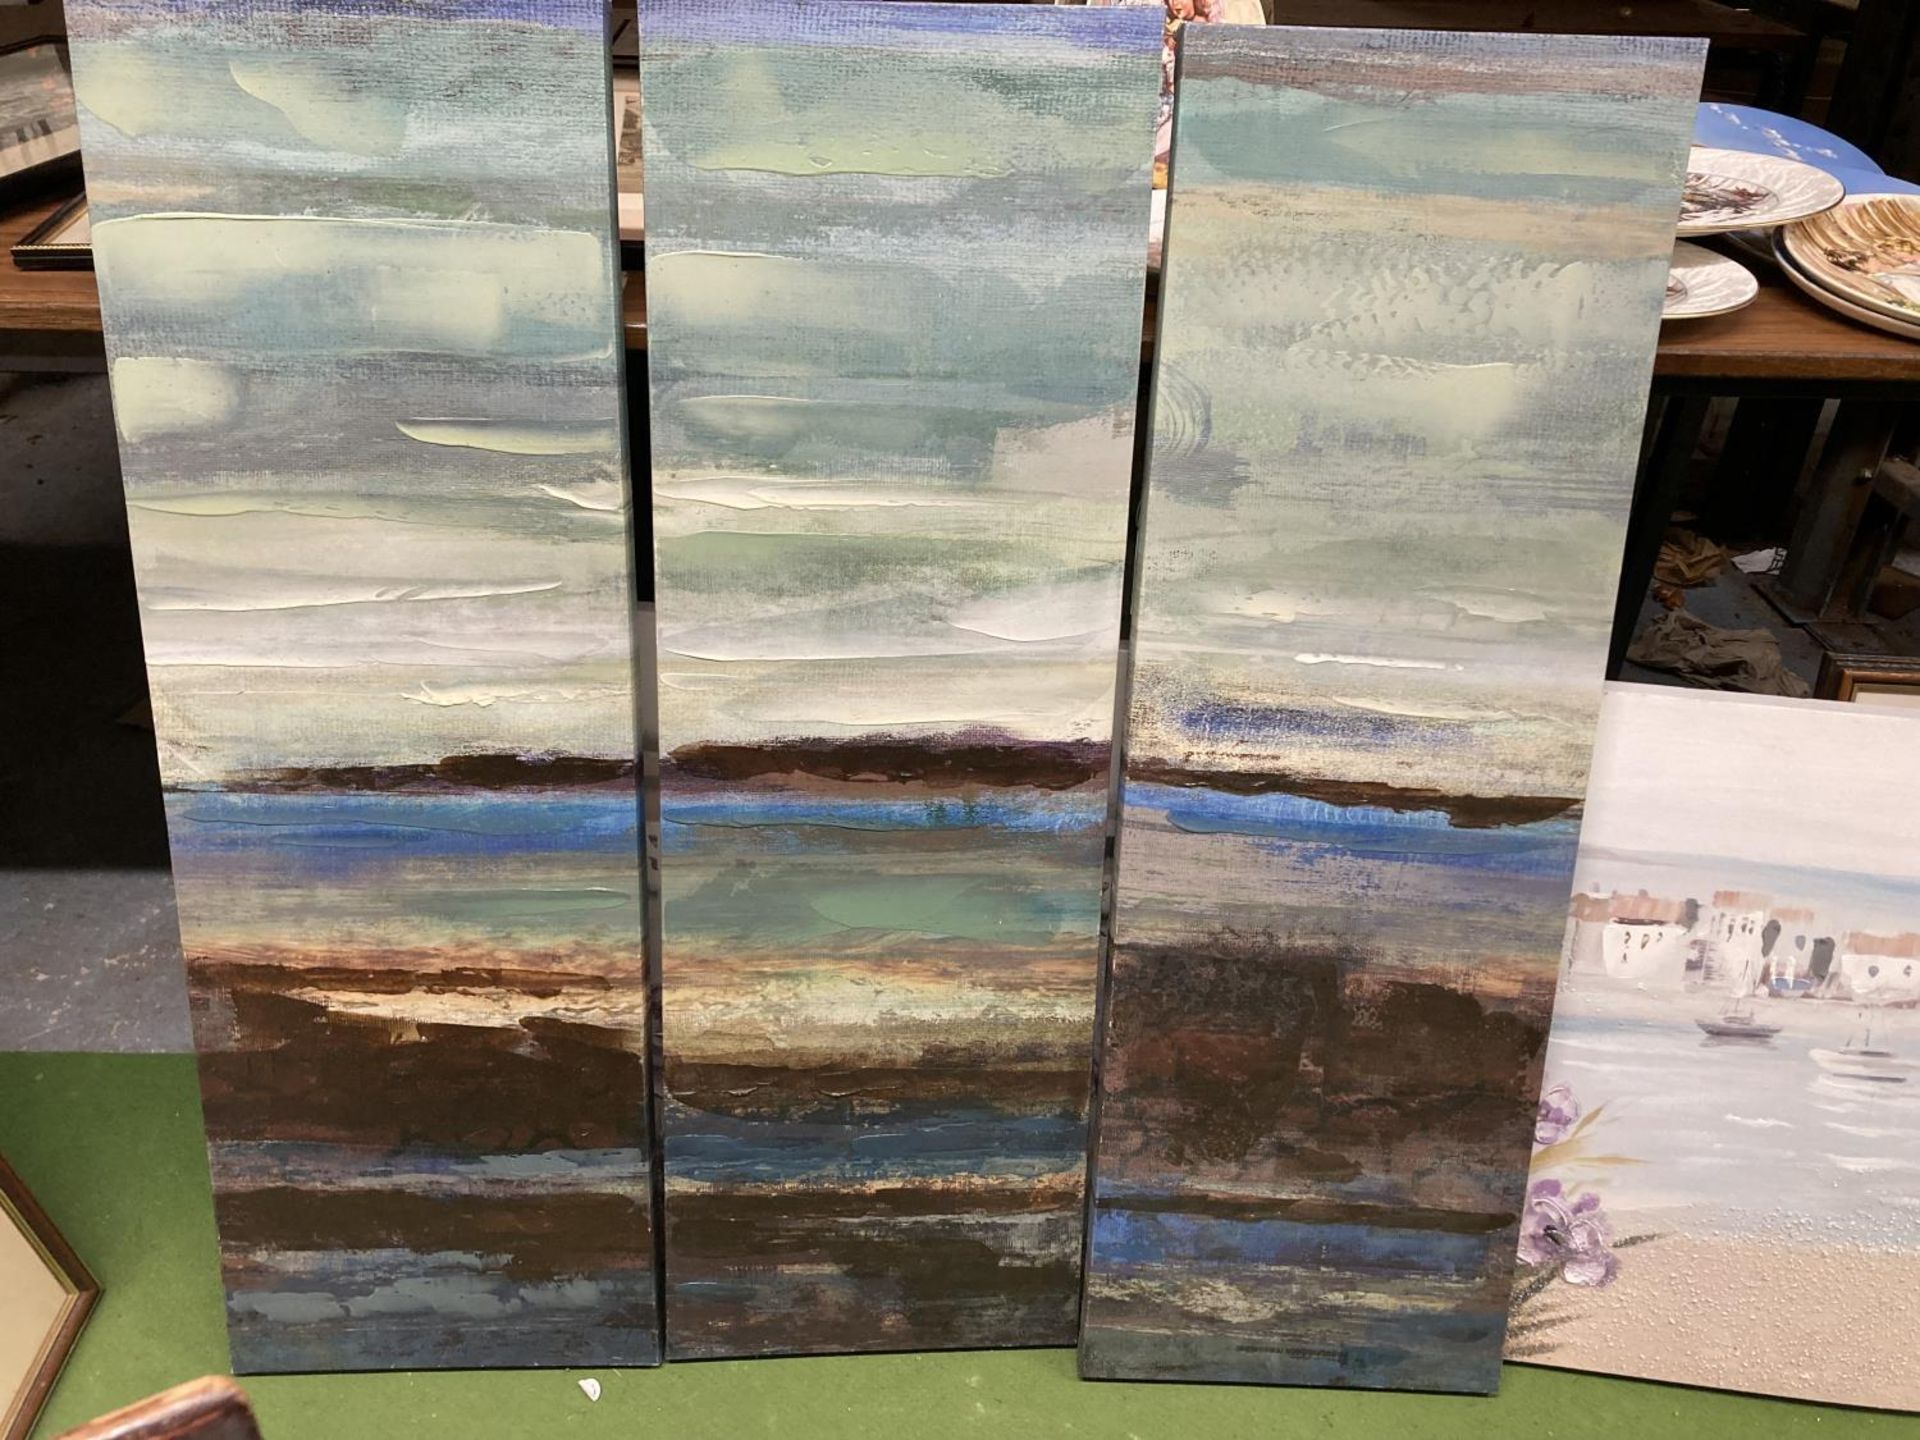 A BEACH SCENE CANVAS AND A FURTHER THREE PART CANVAS DEPICTING THE SEA - Image 2 of 2